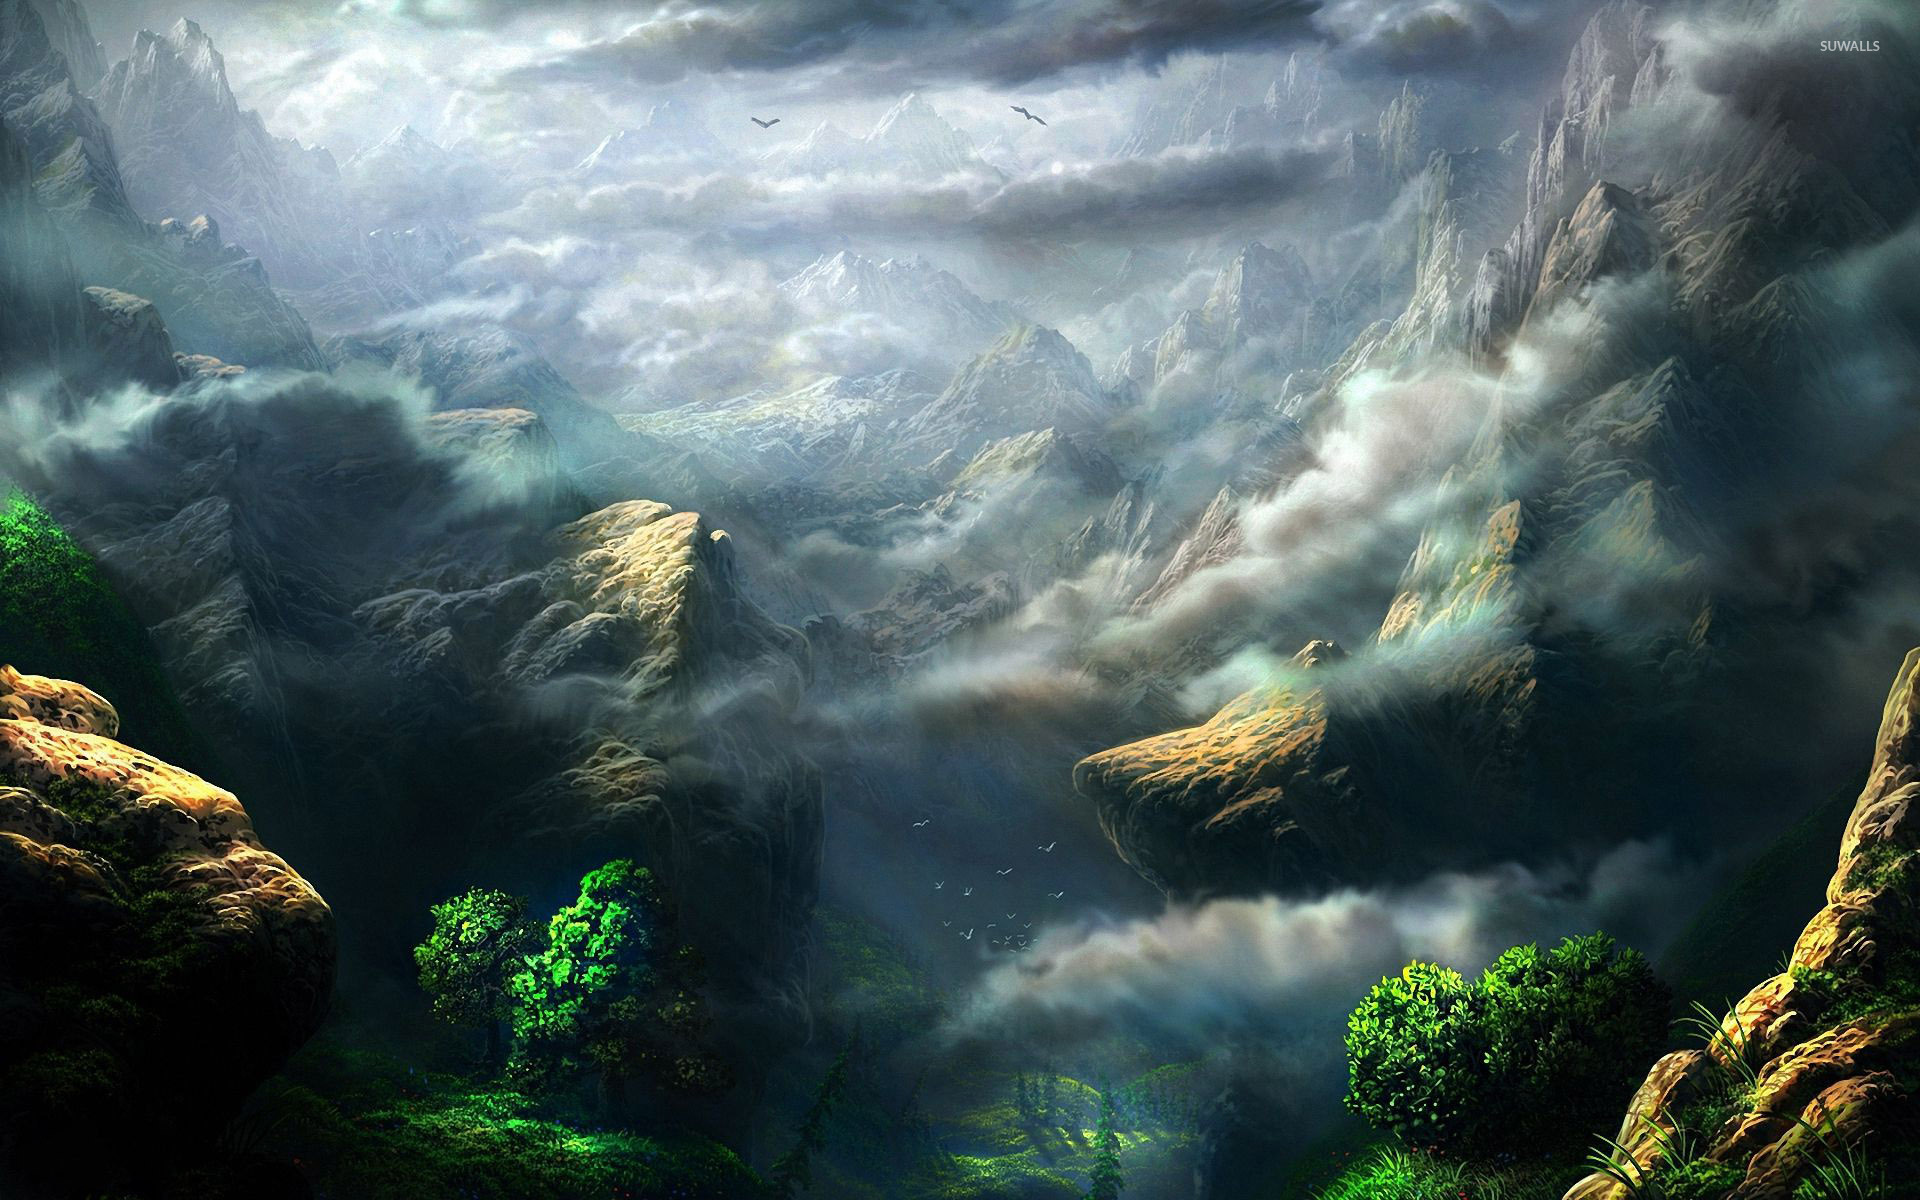 Fog rising from the foggy mountains wallpaper - Digital Art wallpapers